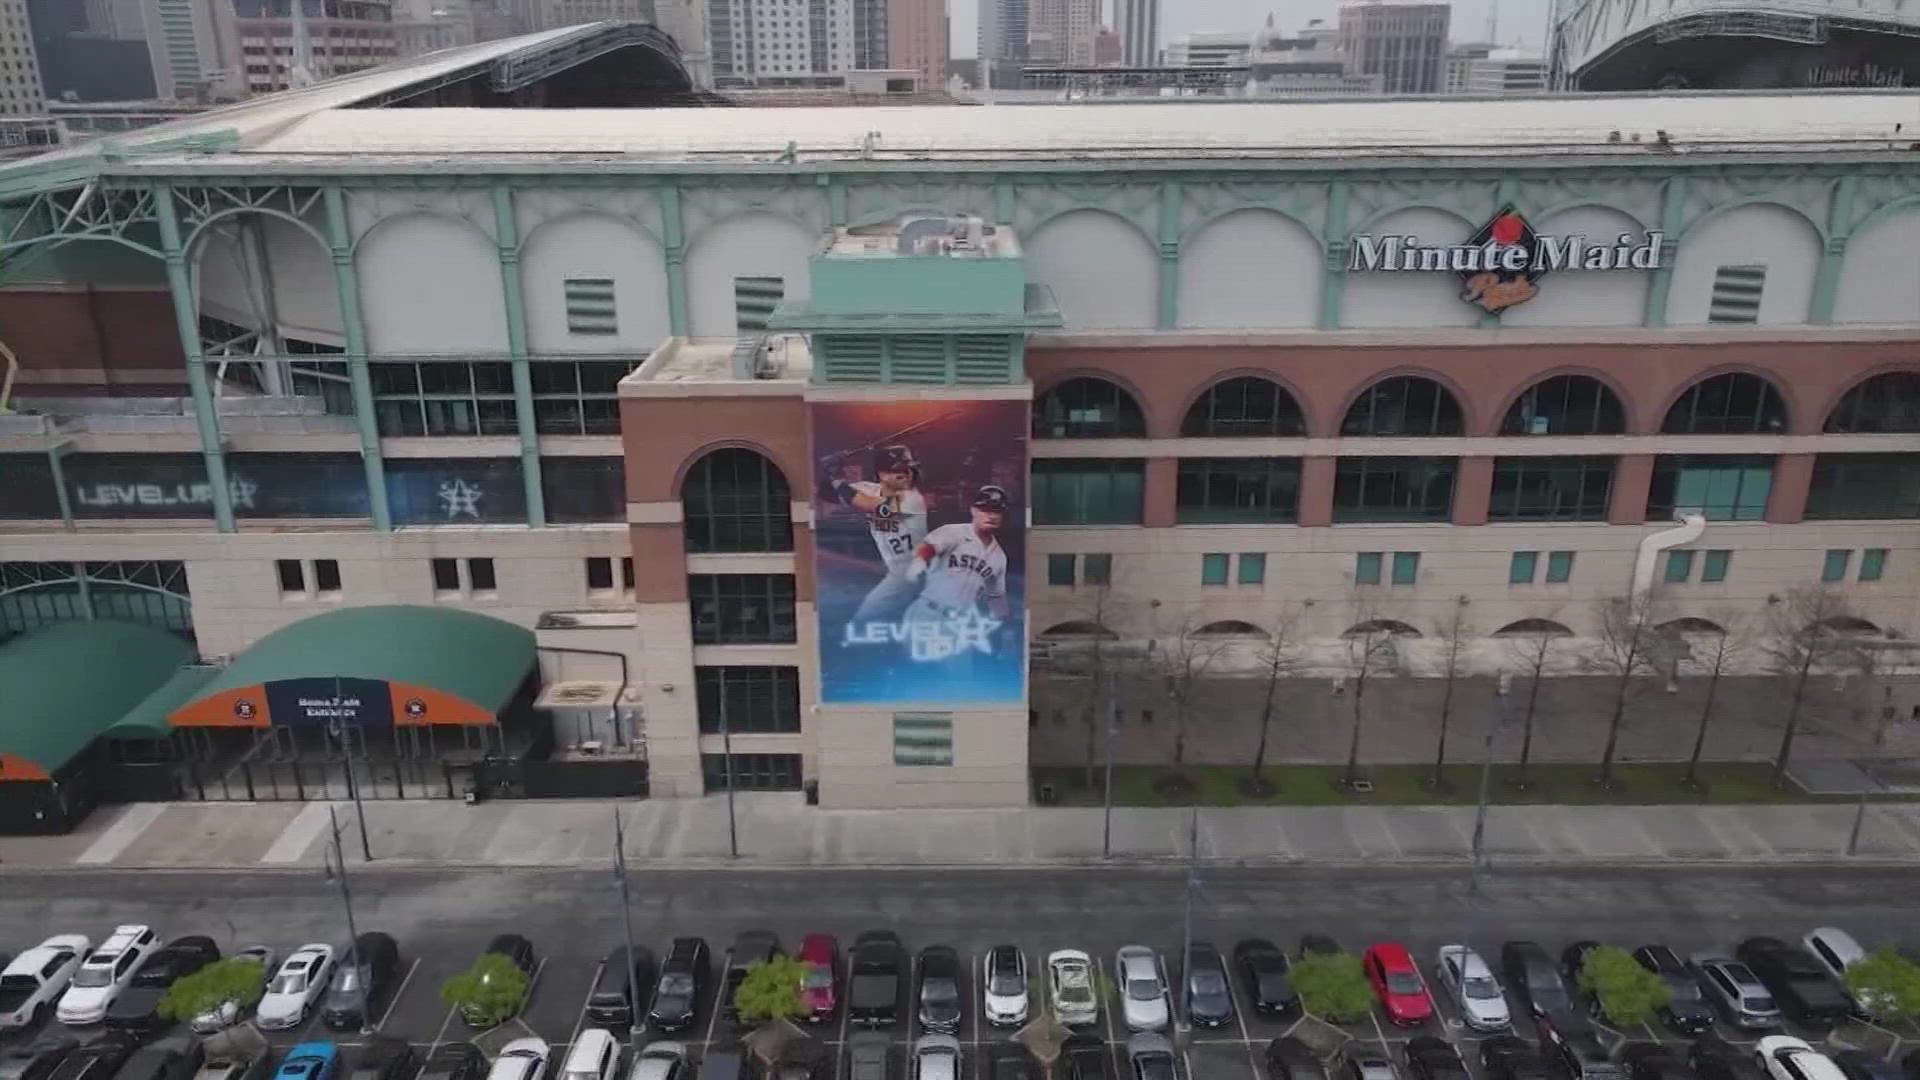 World Series 2017: Minute Maid Park's roof will be closed for Game